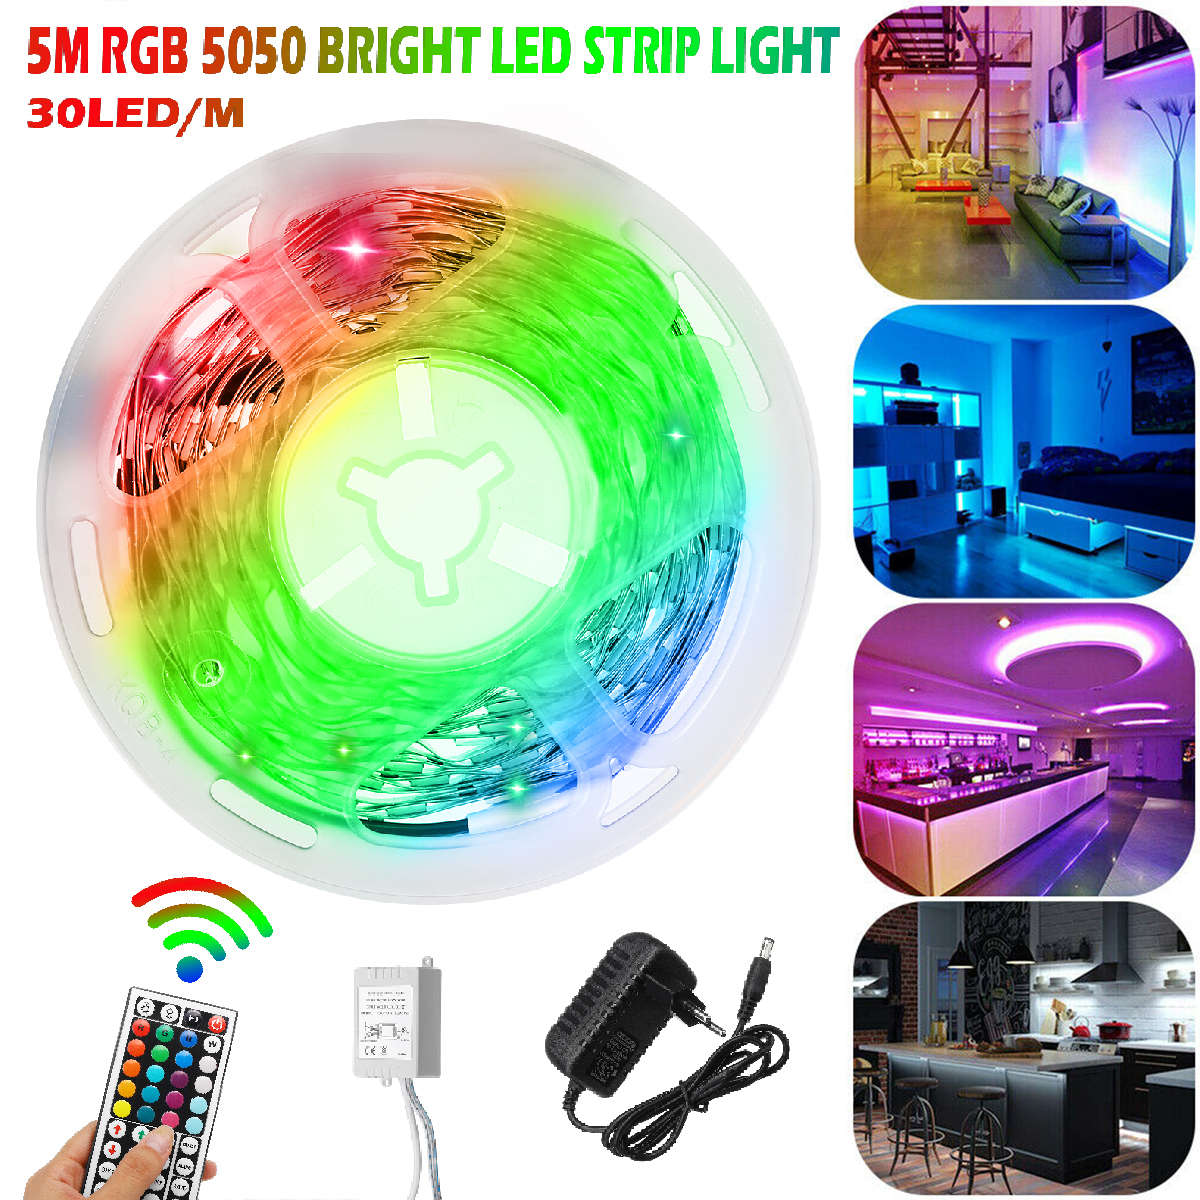 5M-RGB-5050-NOT-Waterproof-LED-Strip-Light-SMD-With-44-Key-Remote-Controller-1691938-1